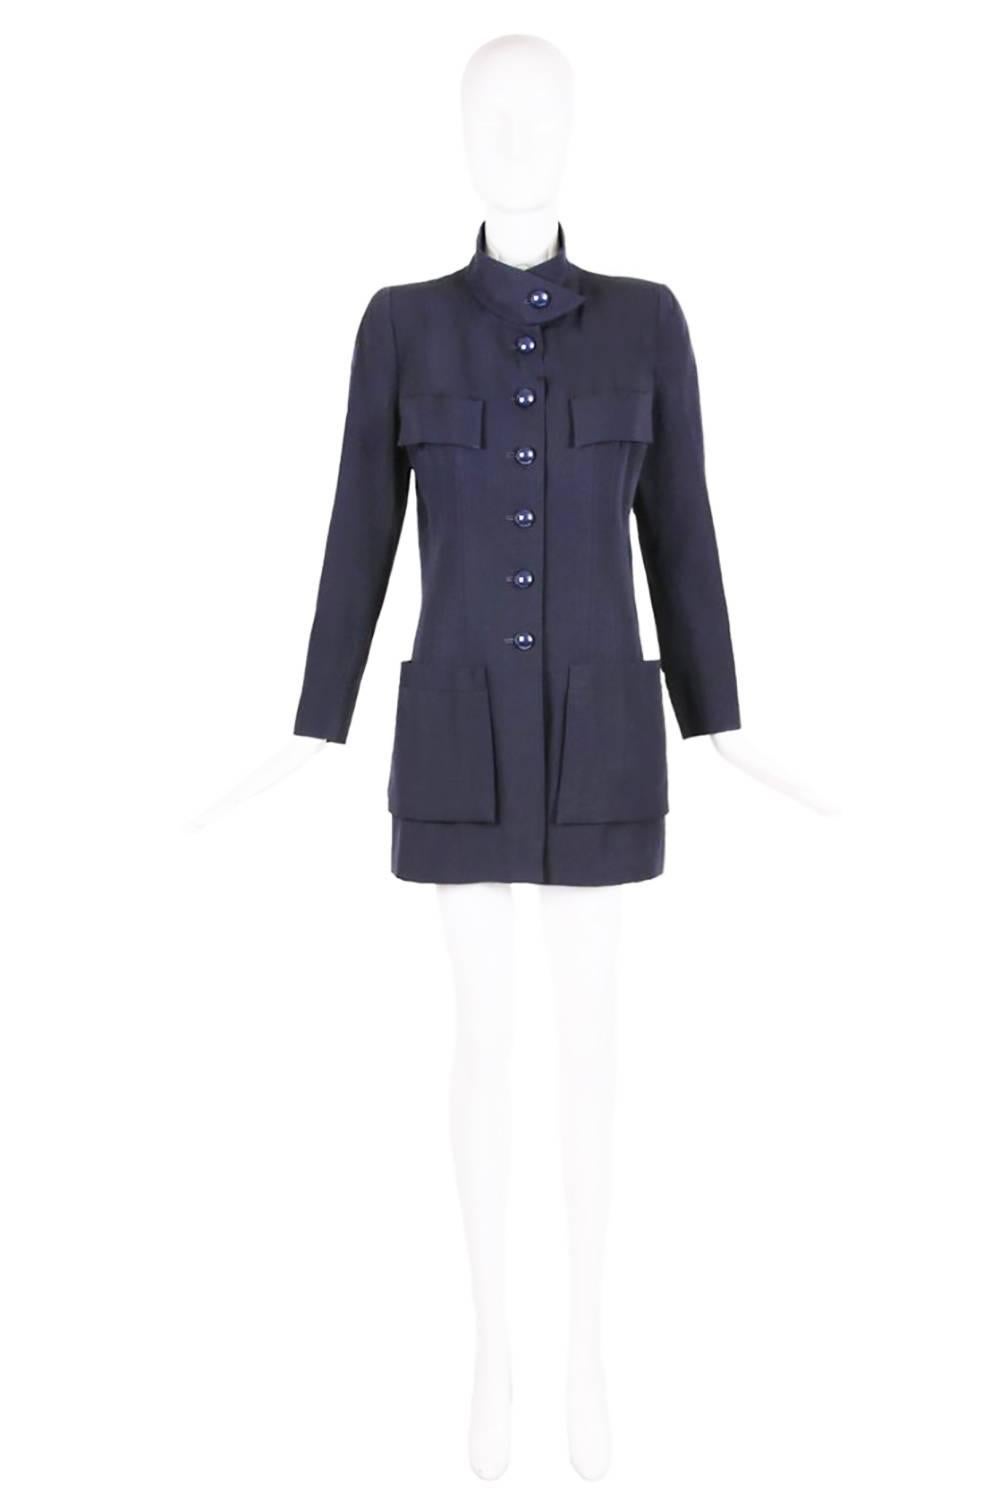 Chanel haute couture navy blue wool jacket with six oversized shiny button closures down center front and at the cuffs, two oversized frontal pockets at the hips, faux patch pockets at the chest and paneling design down the front and back. The